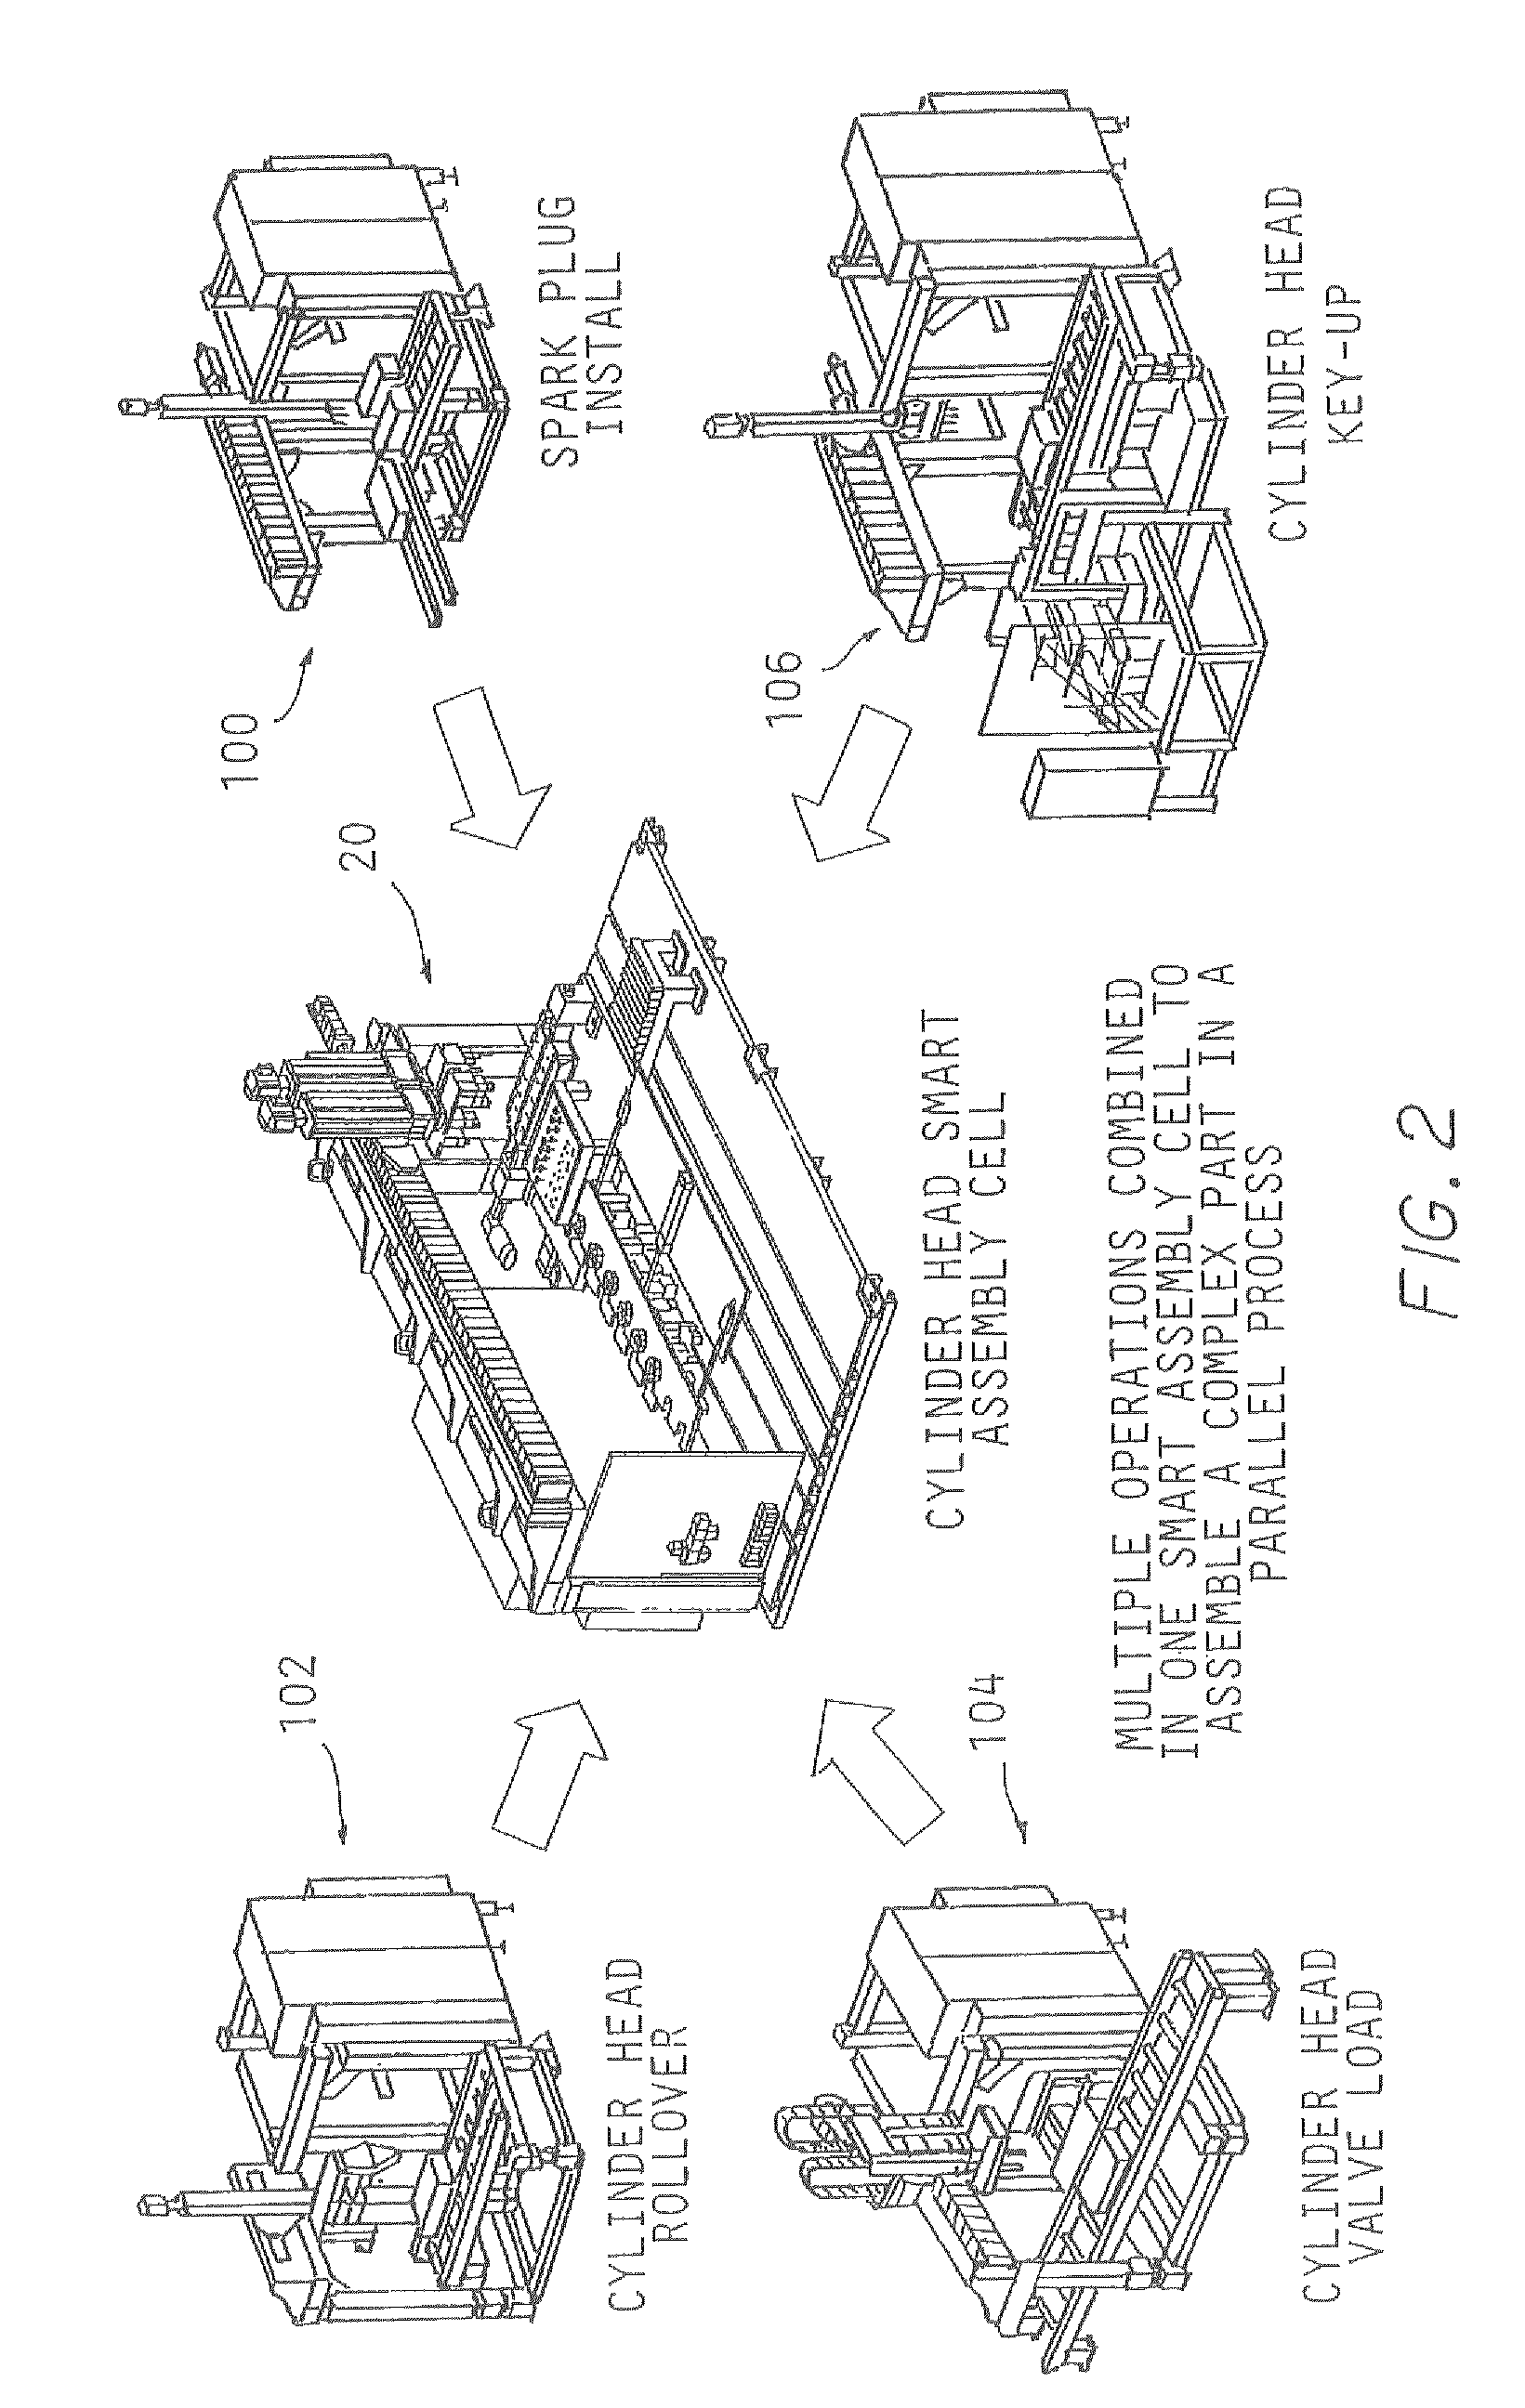 Method and apparatus for assembling a complex product in a parallel process system